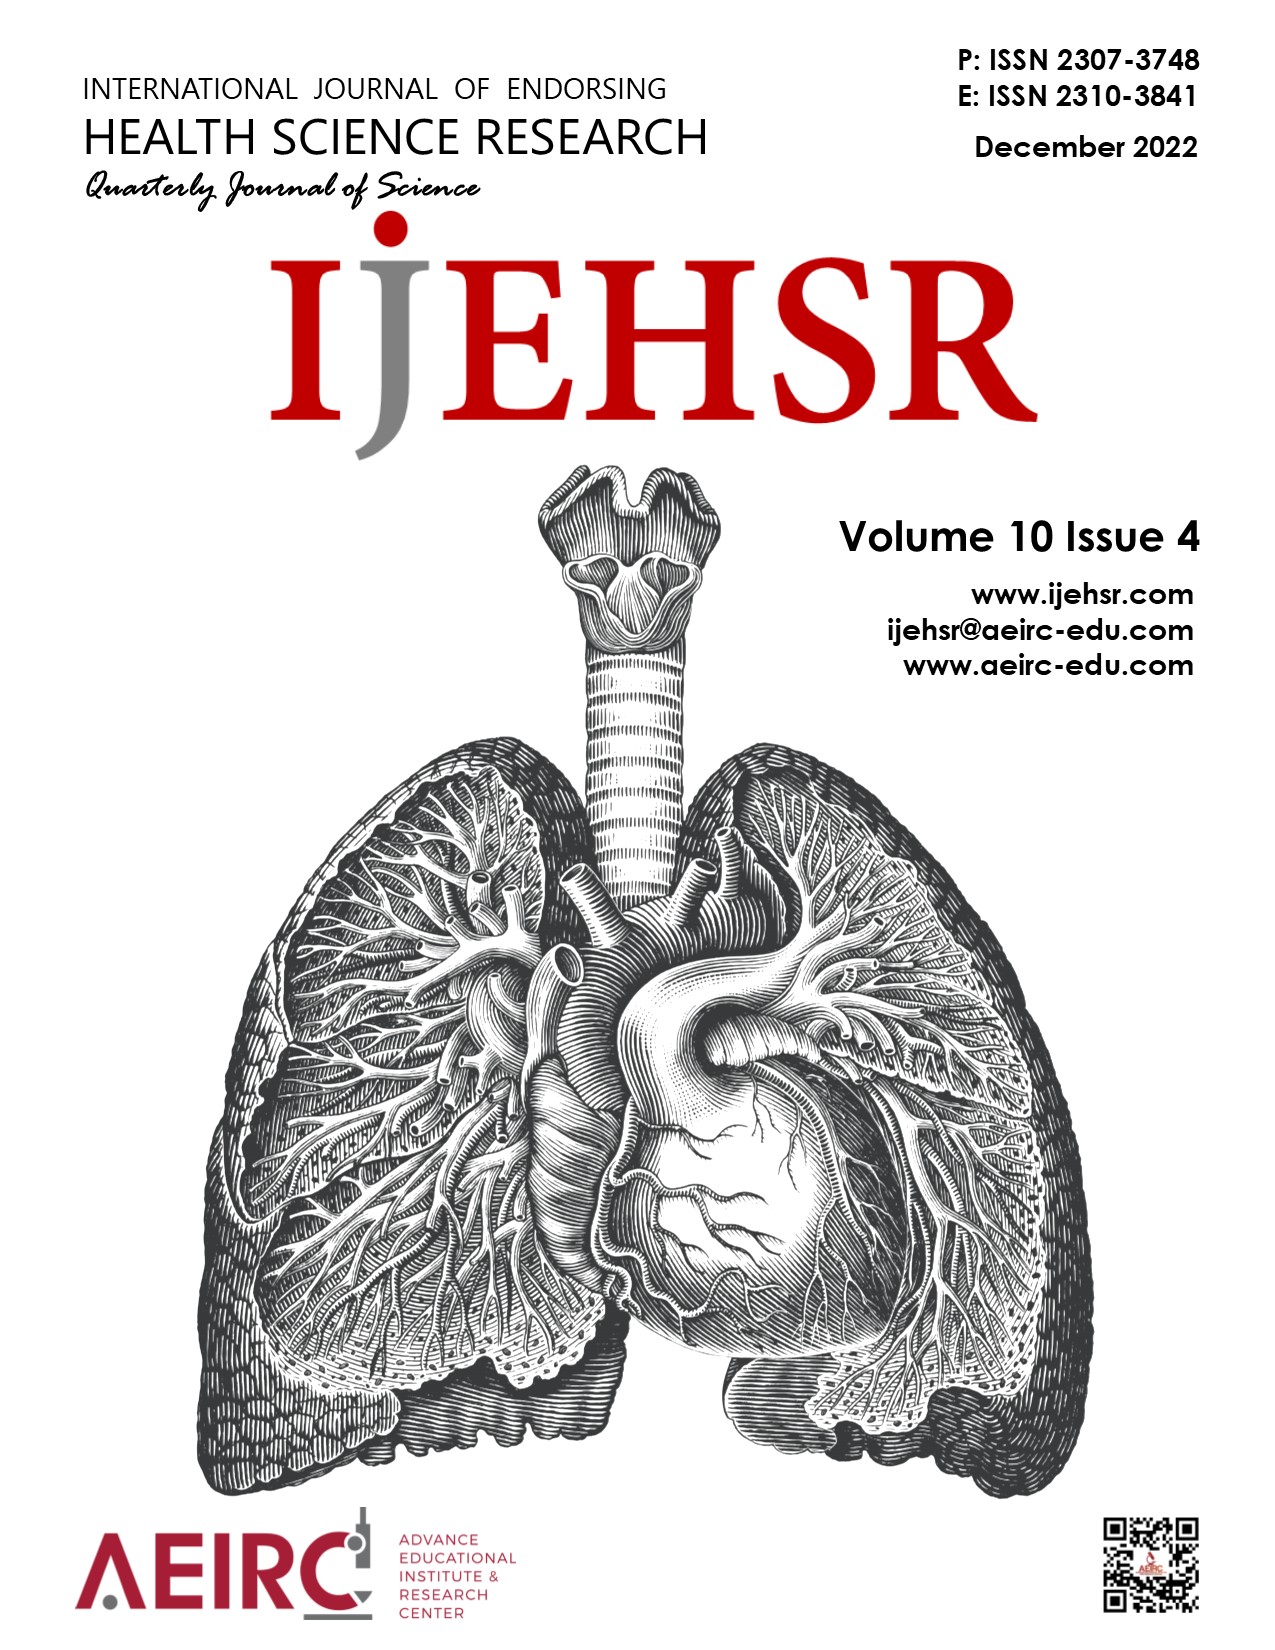 					View Vol. 10 No. 4 (2022): International Journal of Endorsing Health Science Research
				